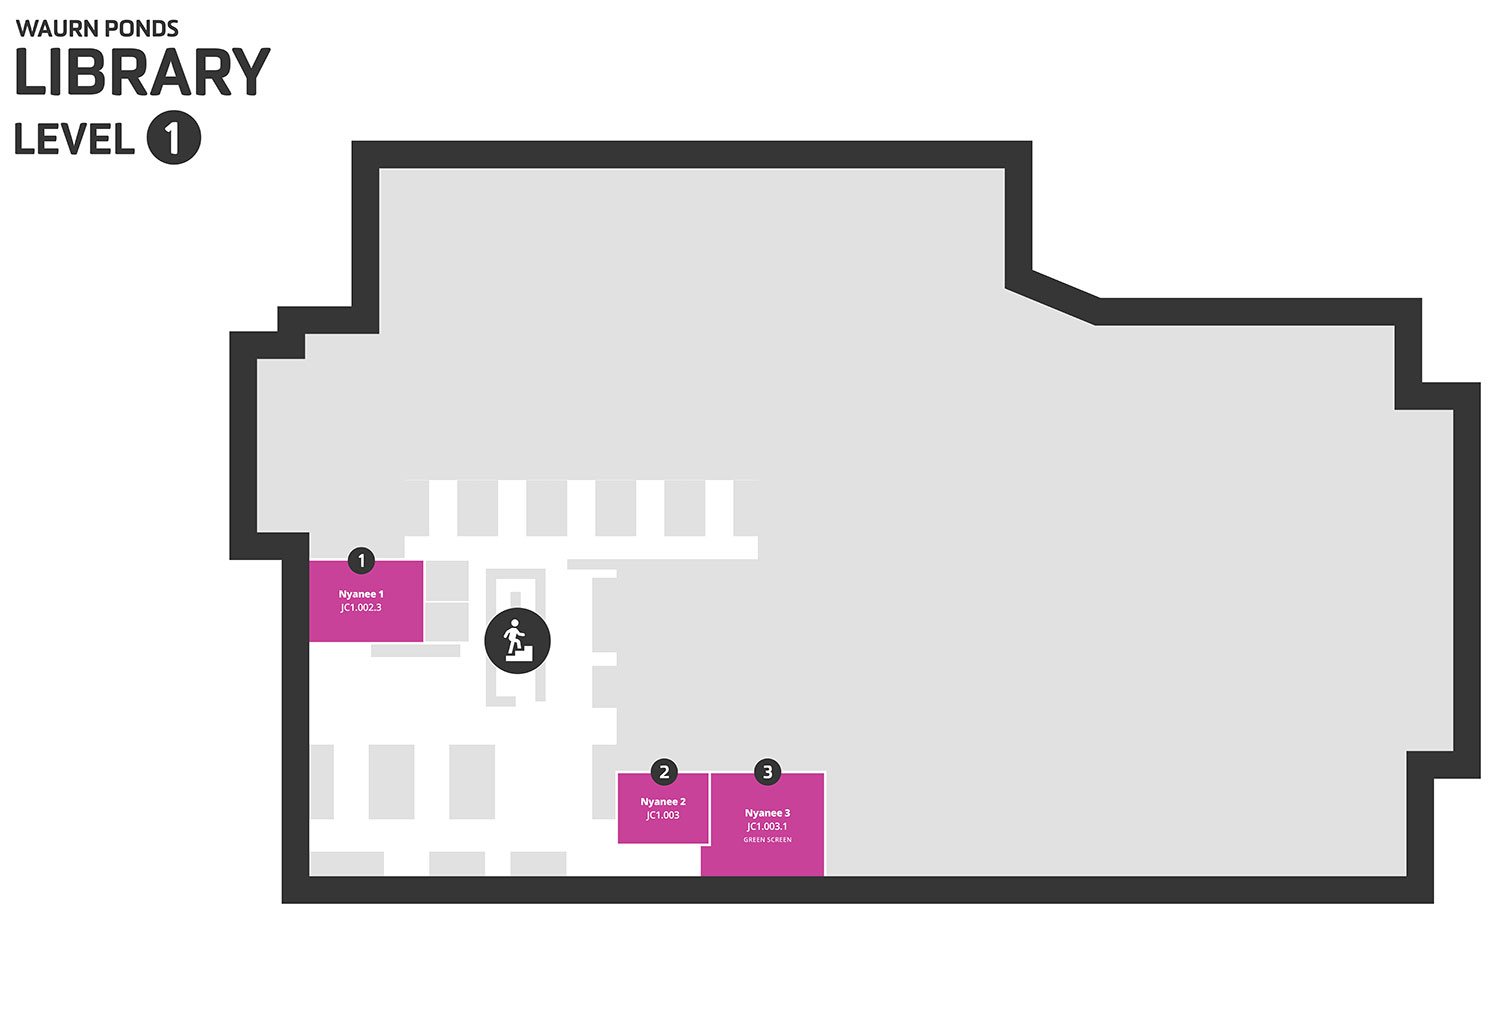 Floorplan of Waurn Ponds Campus Library Level 1, showing bookable rooms